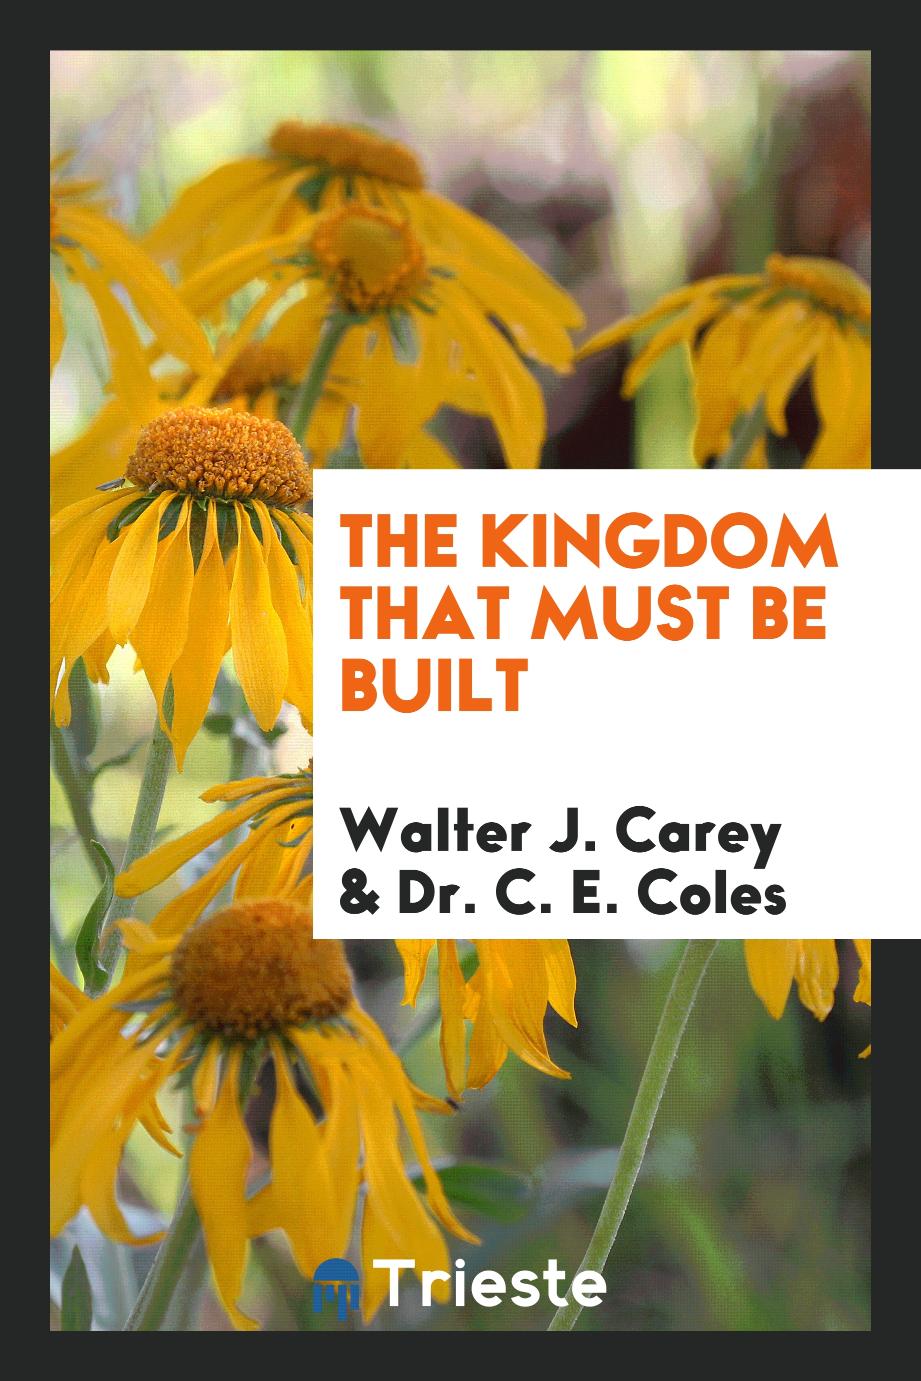 The Kingdom That Must Be Built